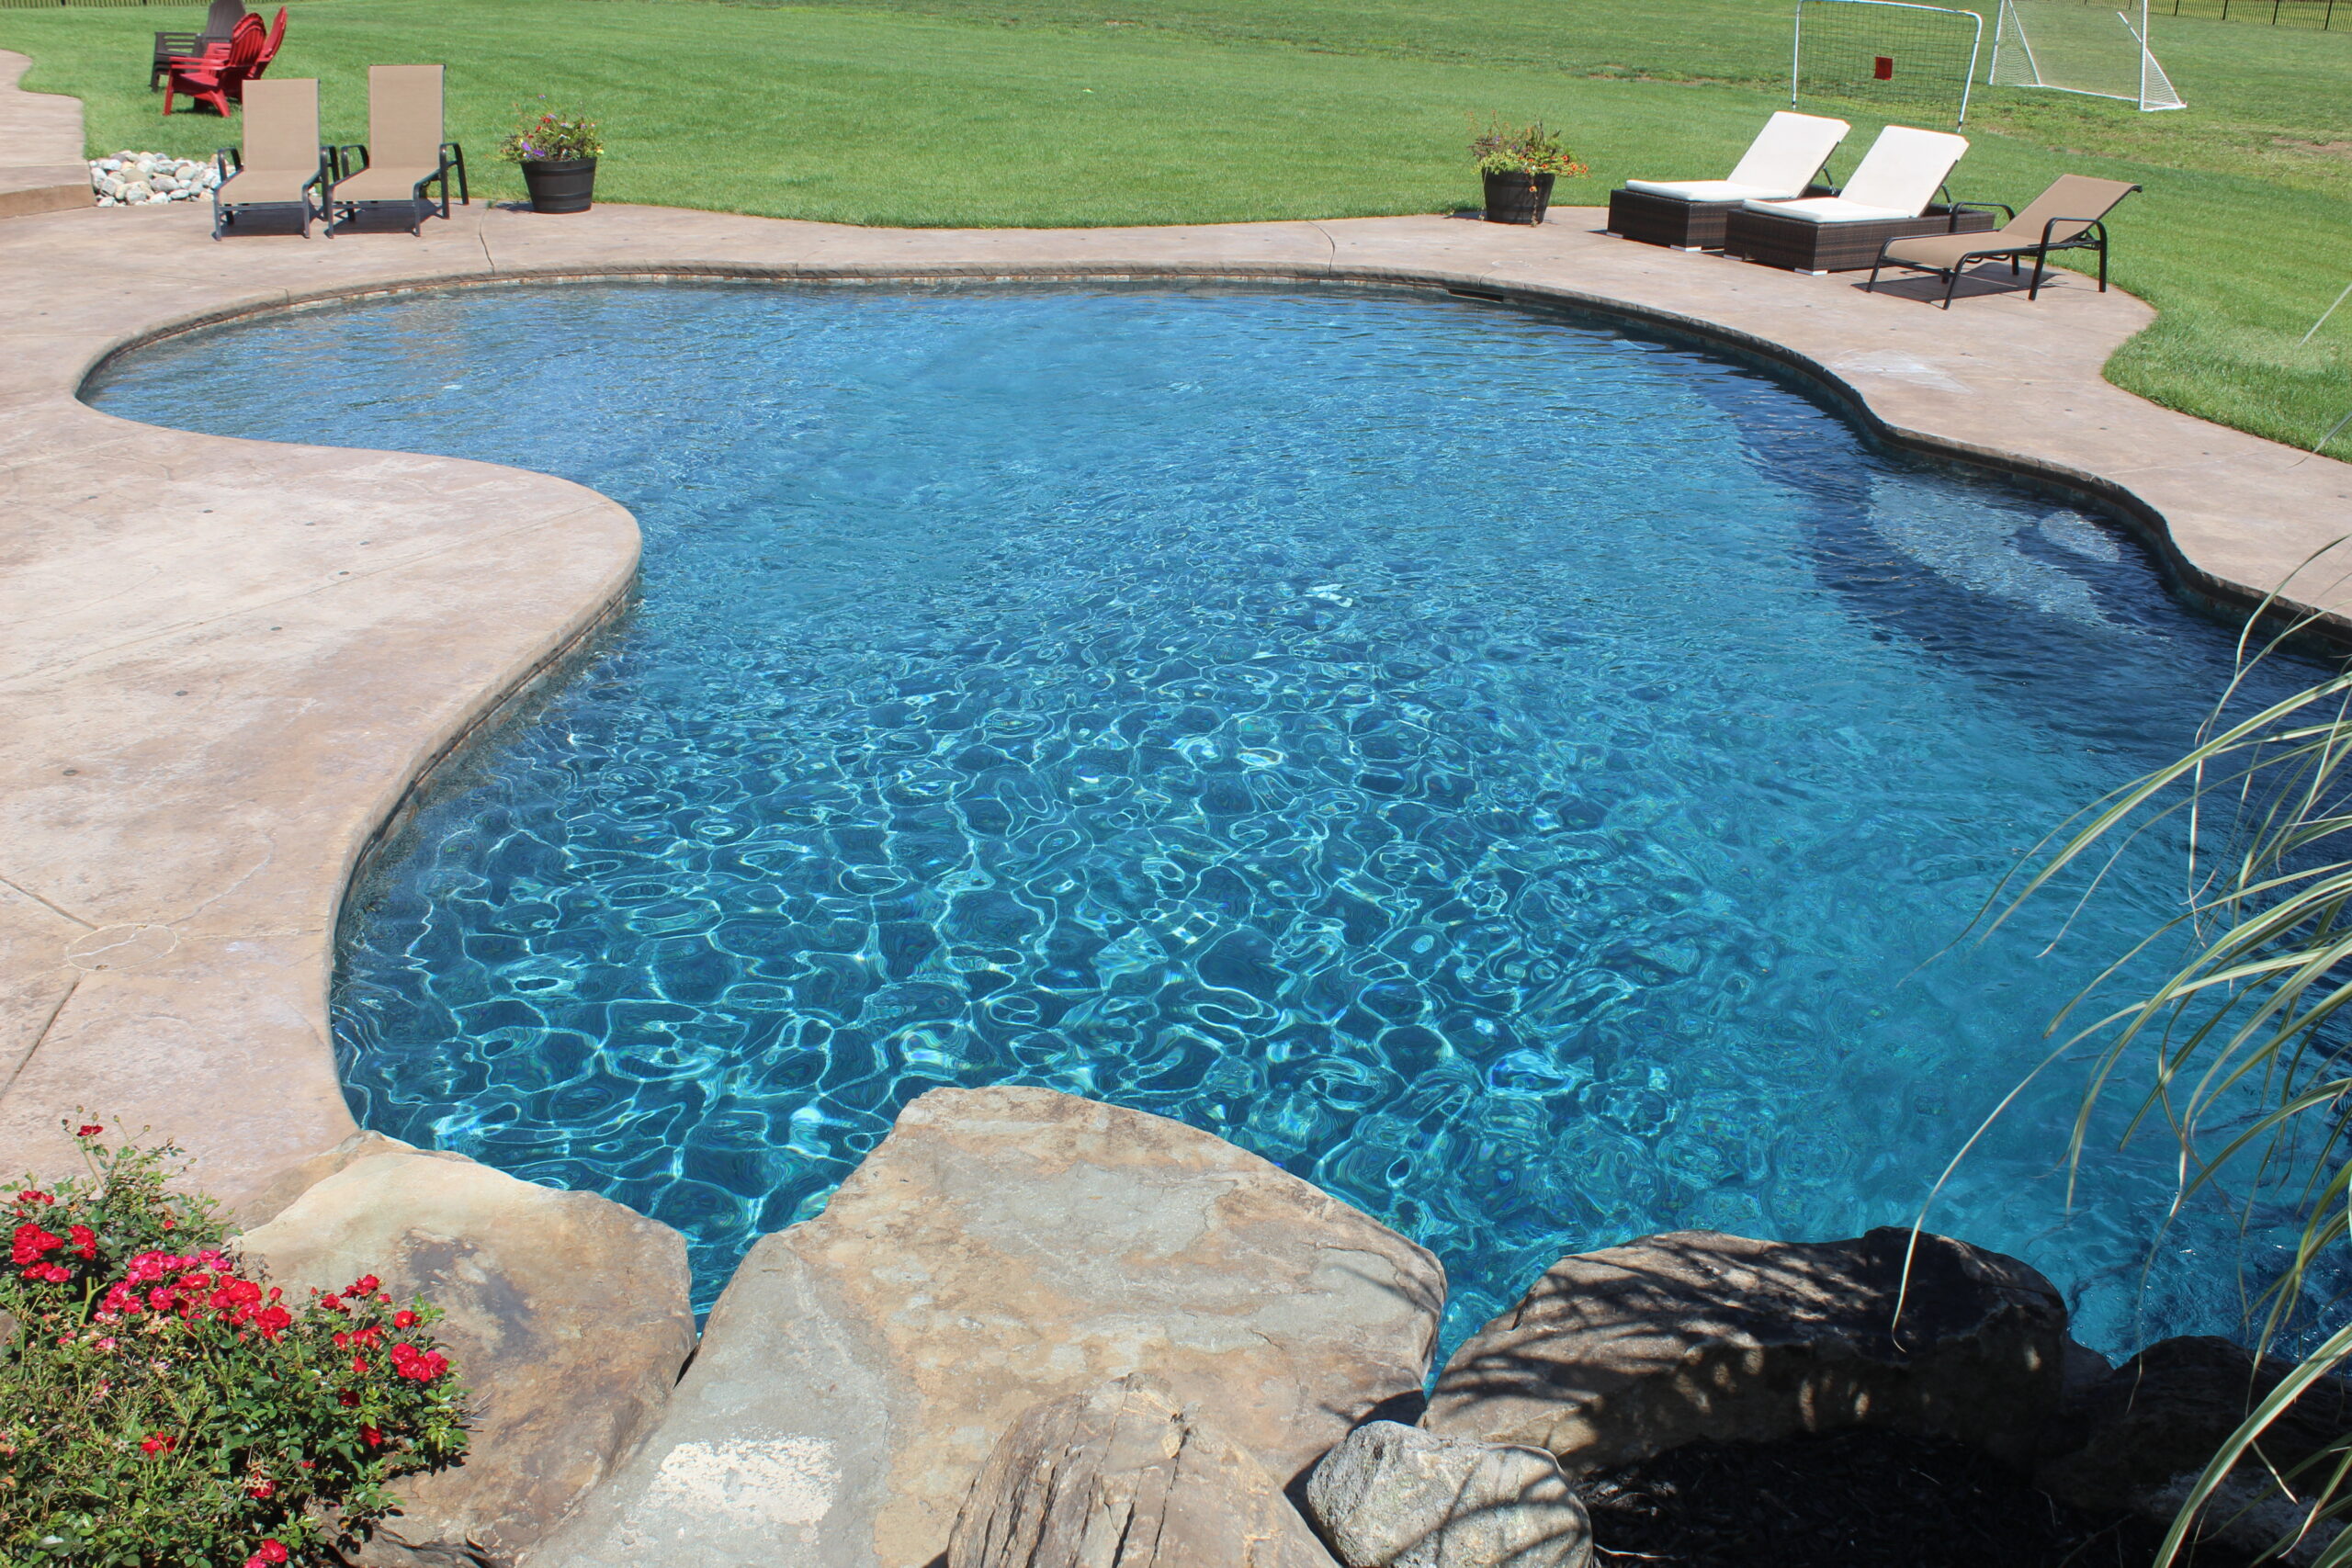 Consulting Experts: Utilizing Winter Months for Pool Design Advice